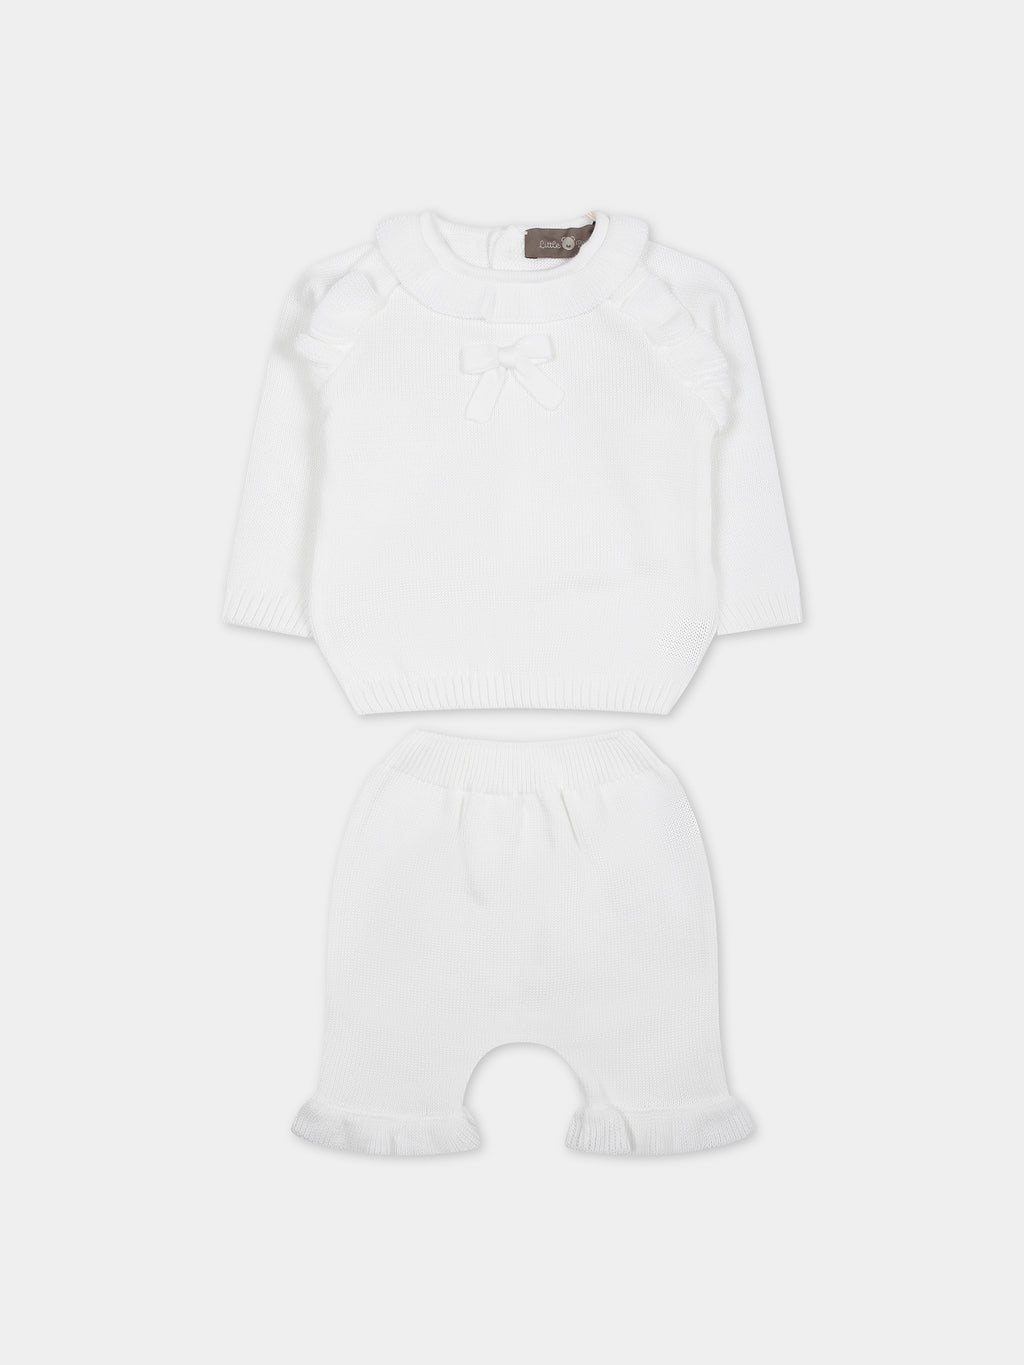 White birth suit for baby girl